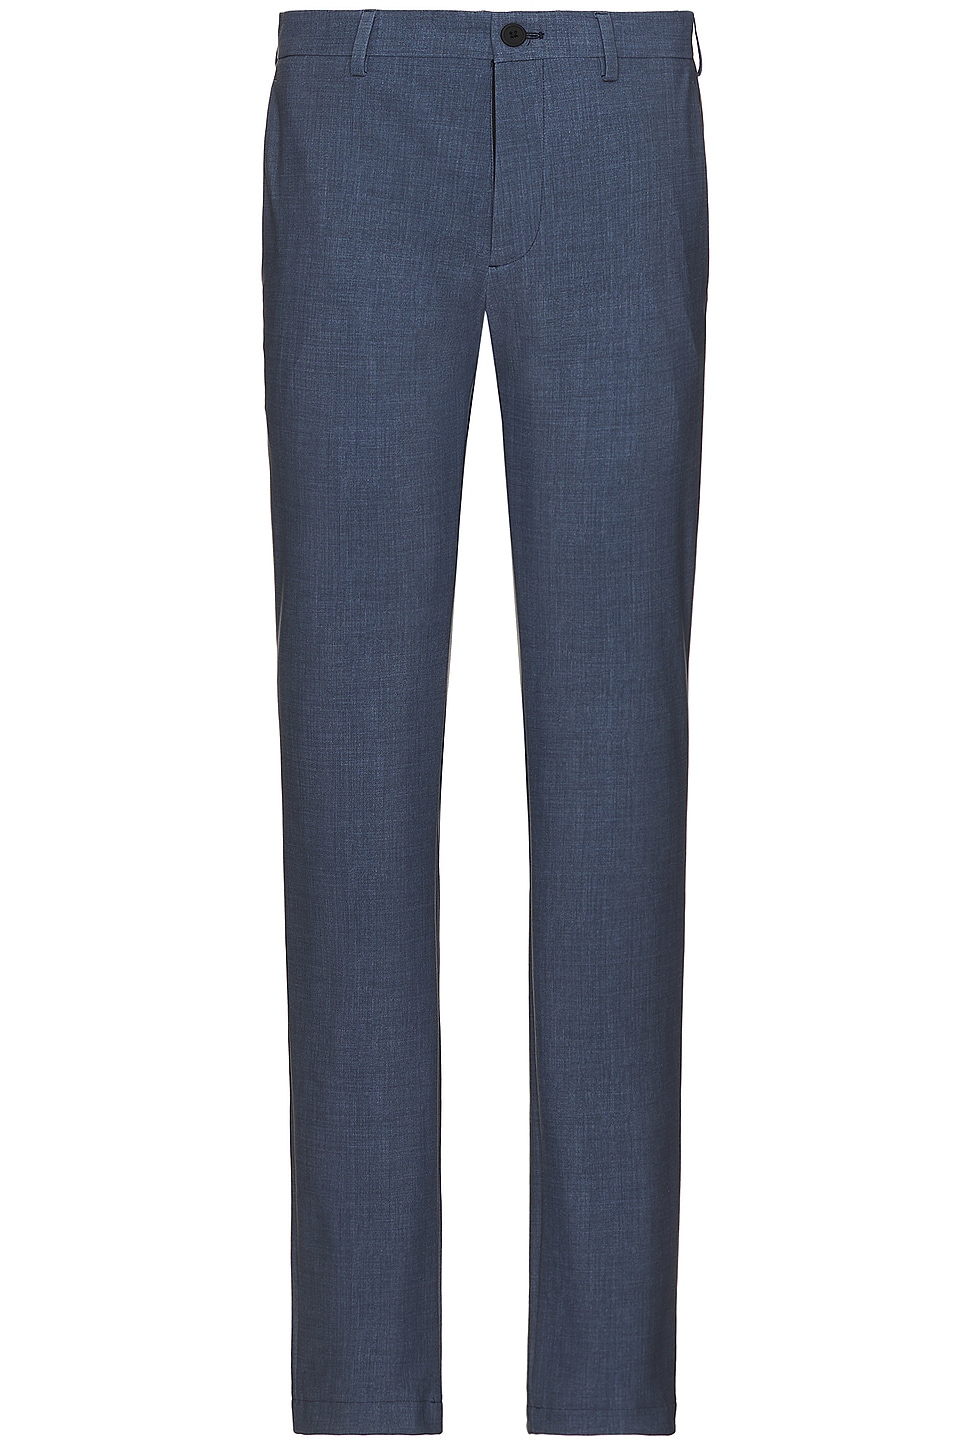 Image 1 of Theory Zaine Pants in Dusty Blue Mel